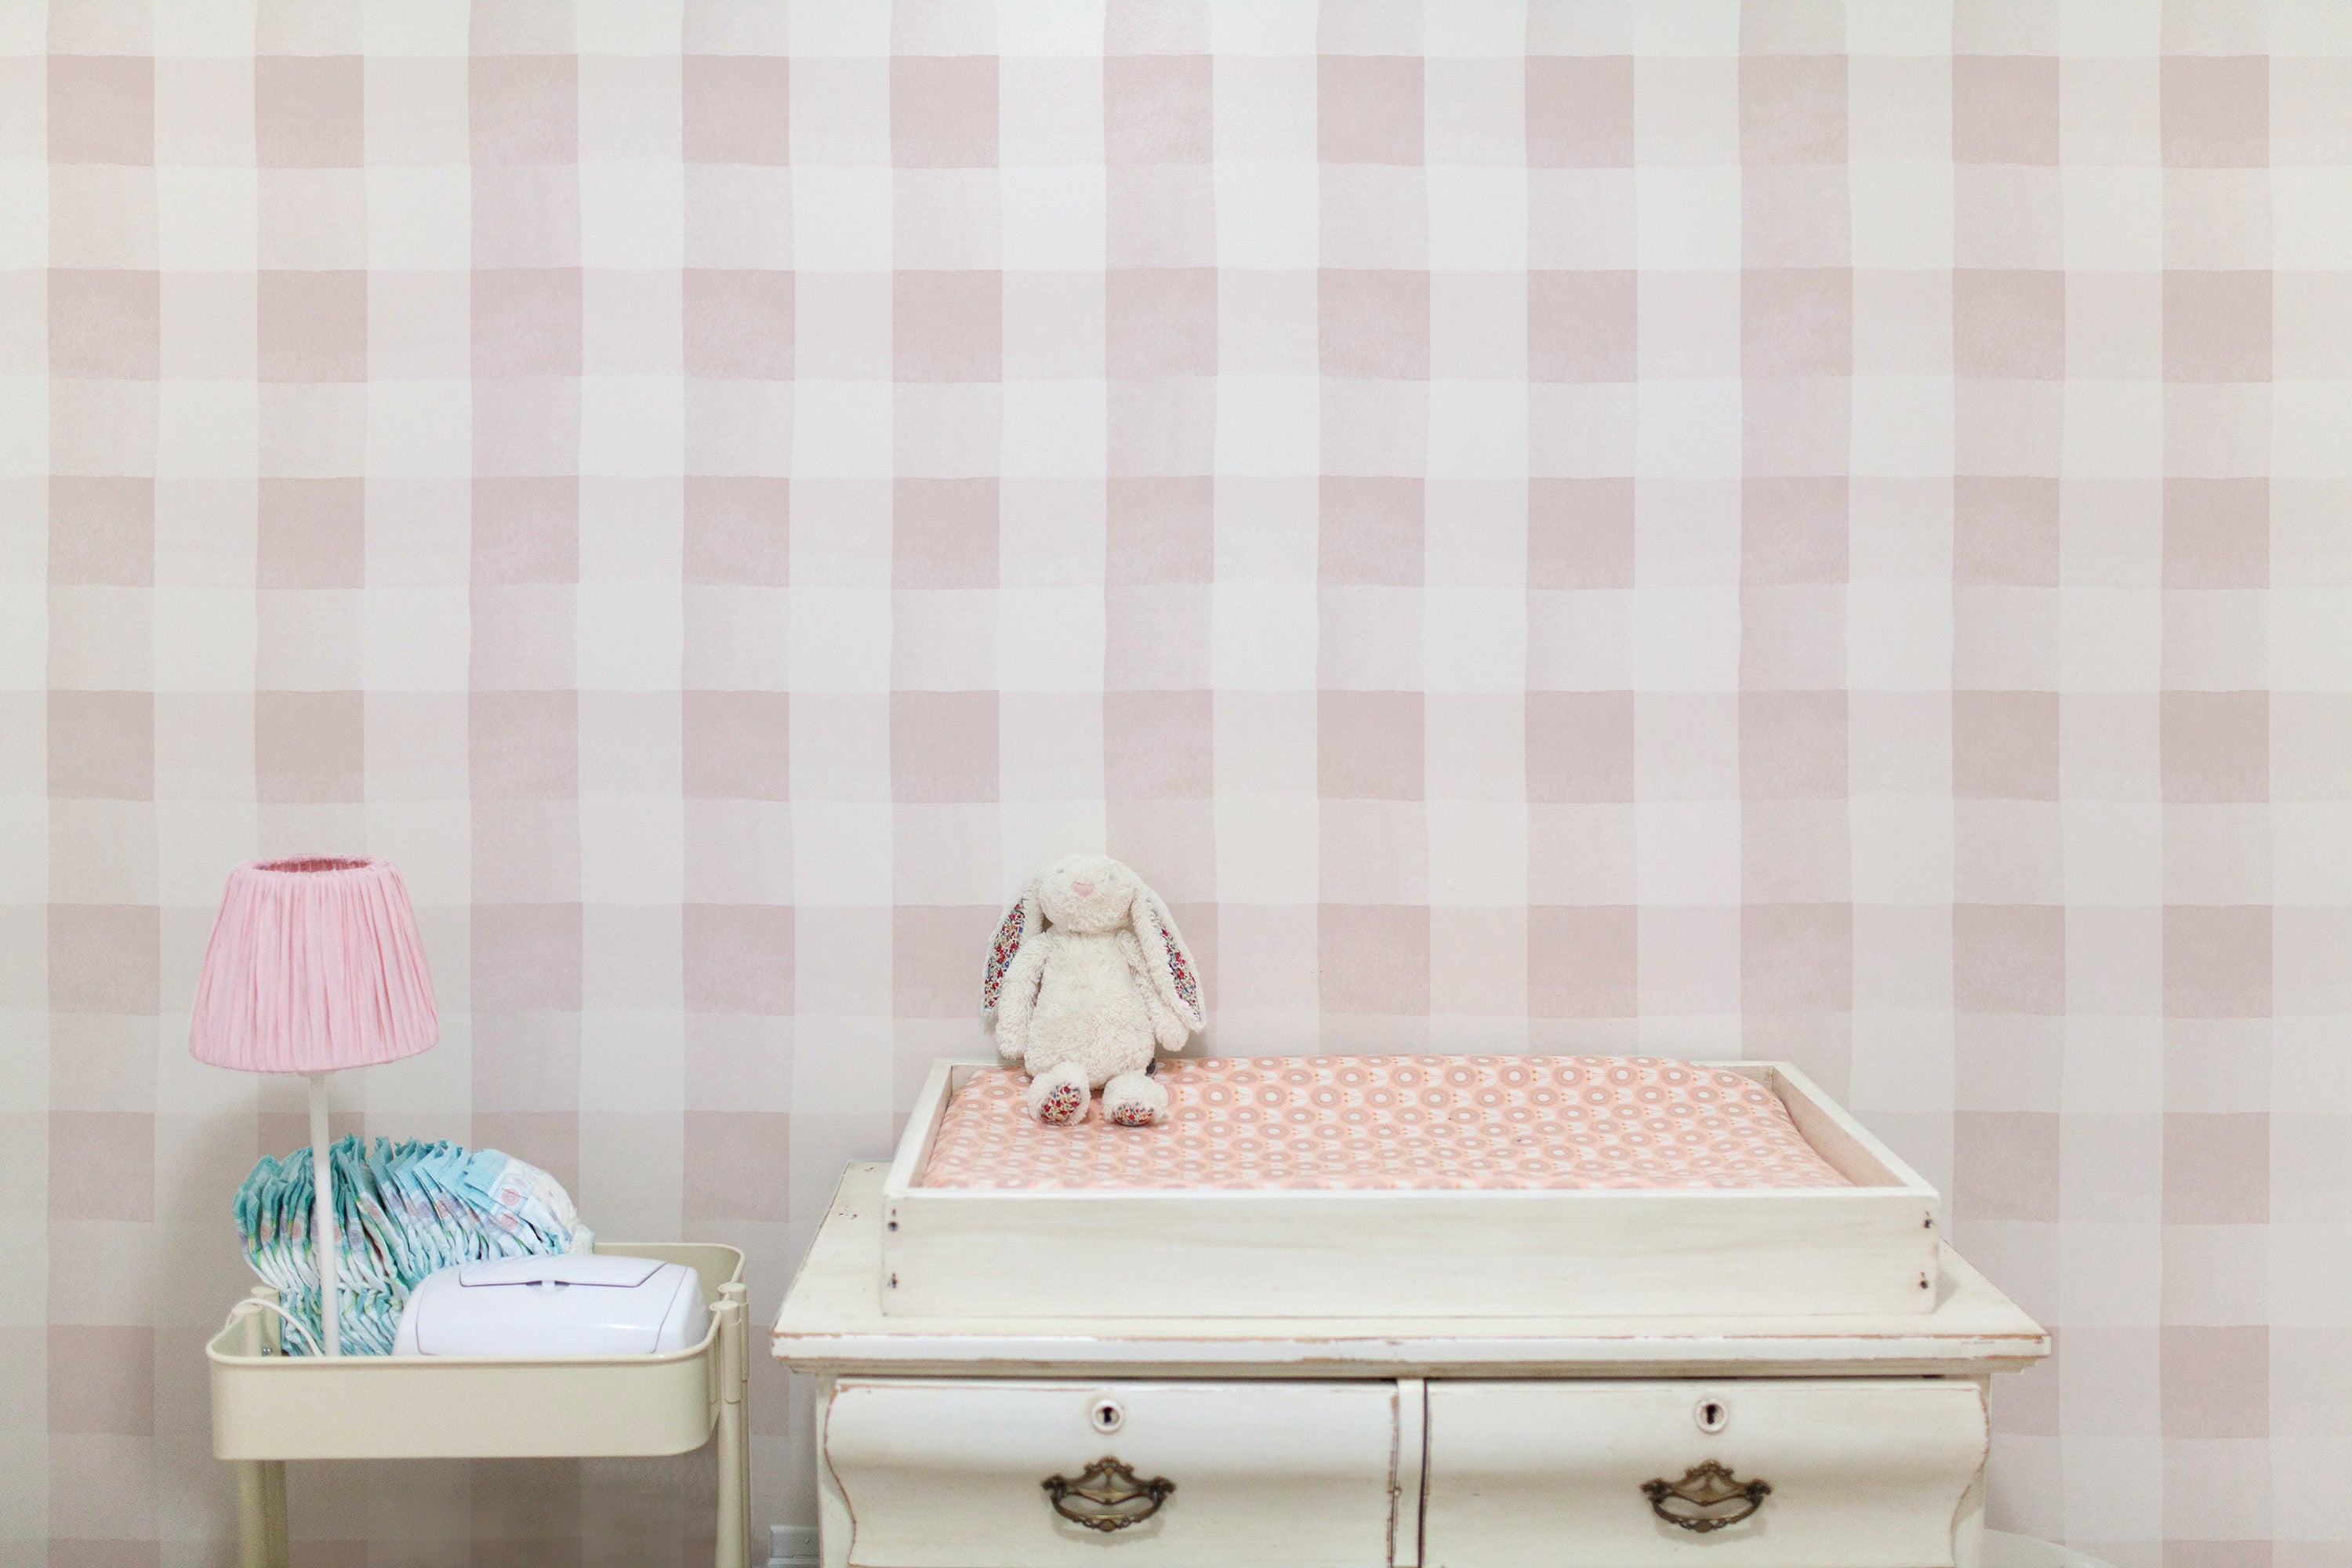 A serene nursery setting with Camille Wallpaper - Nude, featuring a soft checkered pattern in shades of pale pink and white. The gentle backdrop complements the vintage white dresser used as a changing table, adorned with a pink lamp and a plush bunny, creating a warm and inviting space for a child